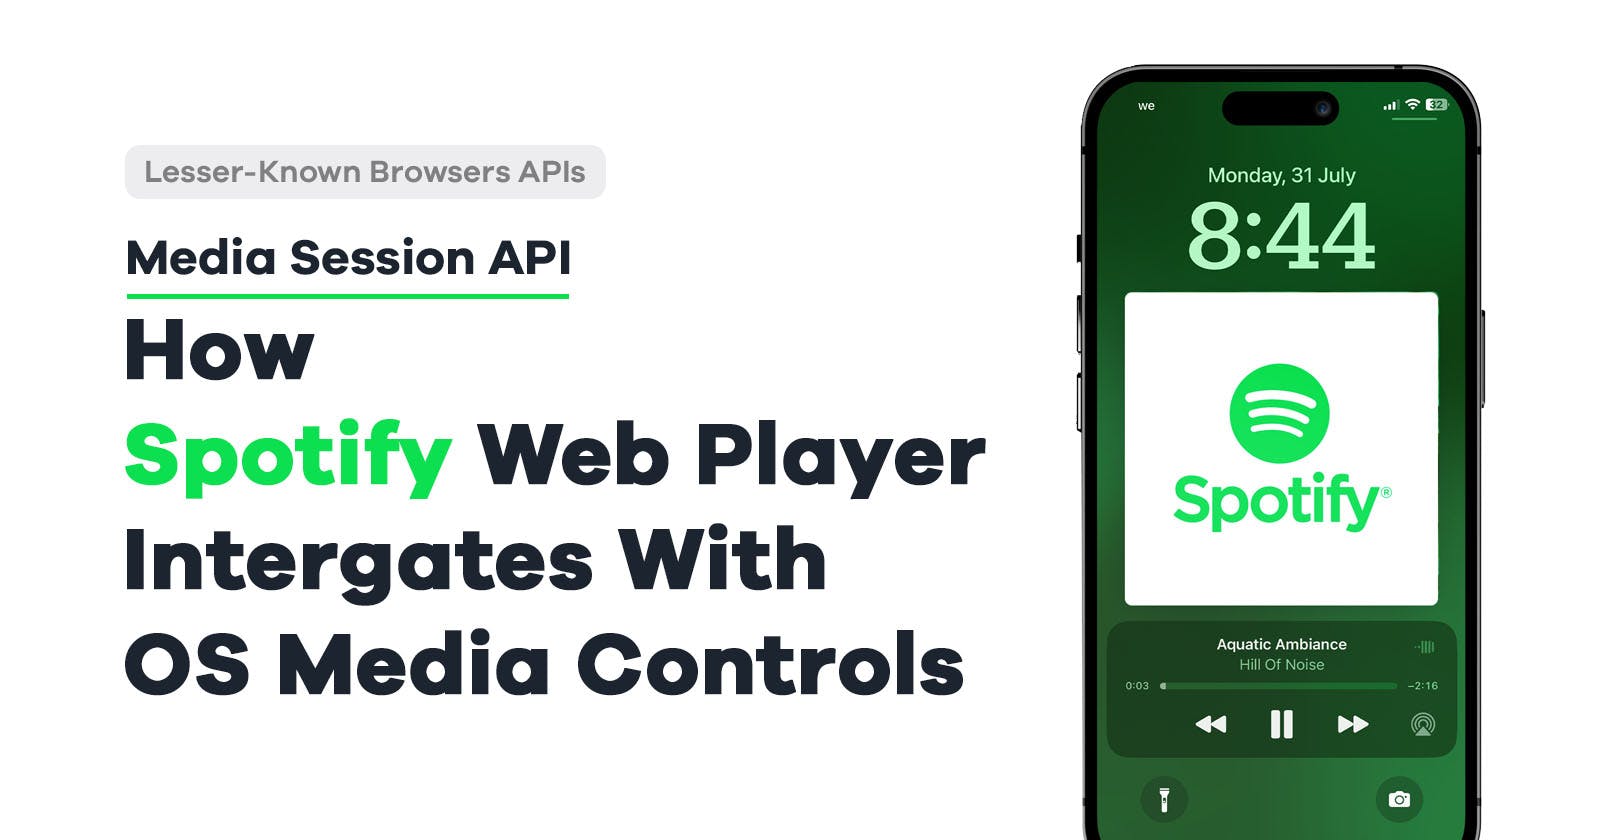 Media Session API: How Spotify Web Player Integrates With OS Media Controls